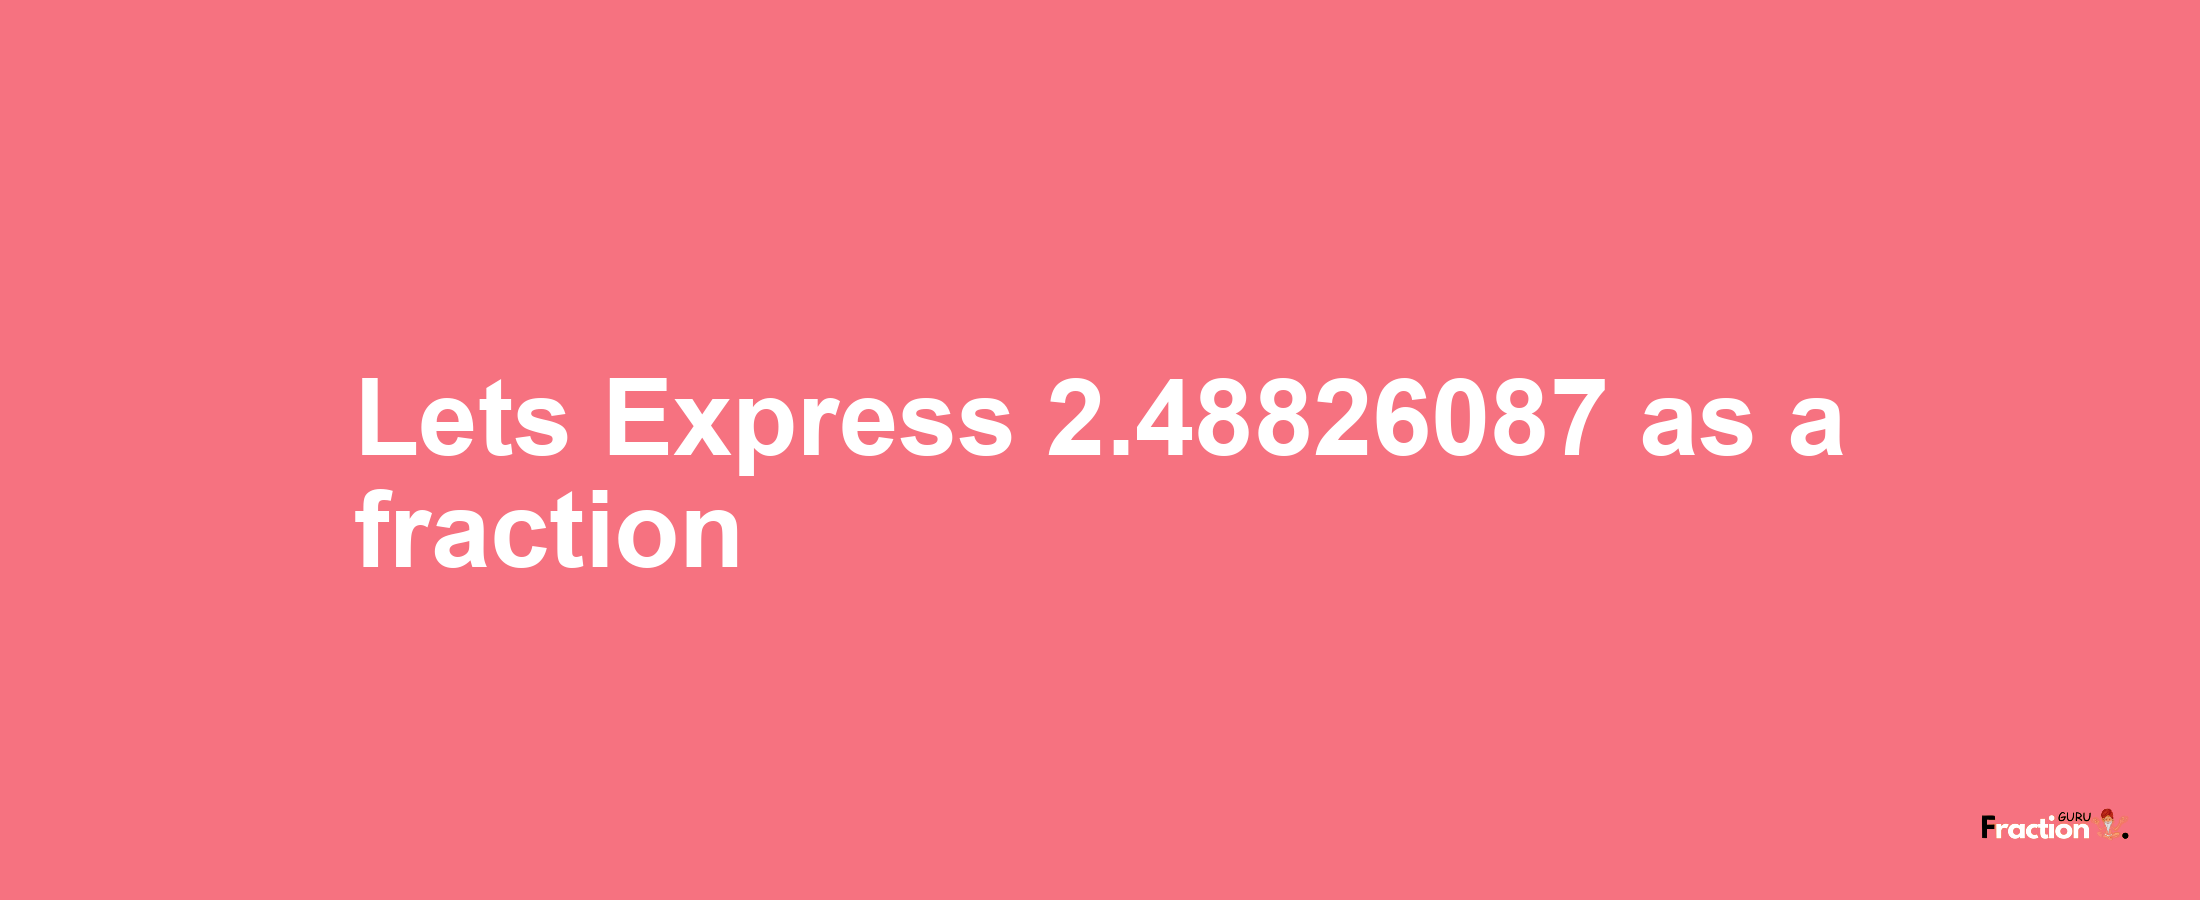 Lets Express 2.48826087 as afraction